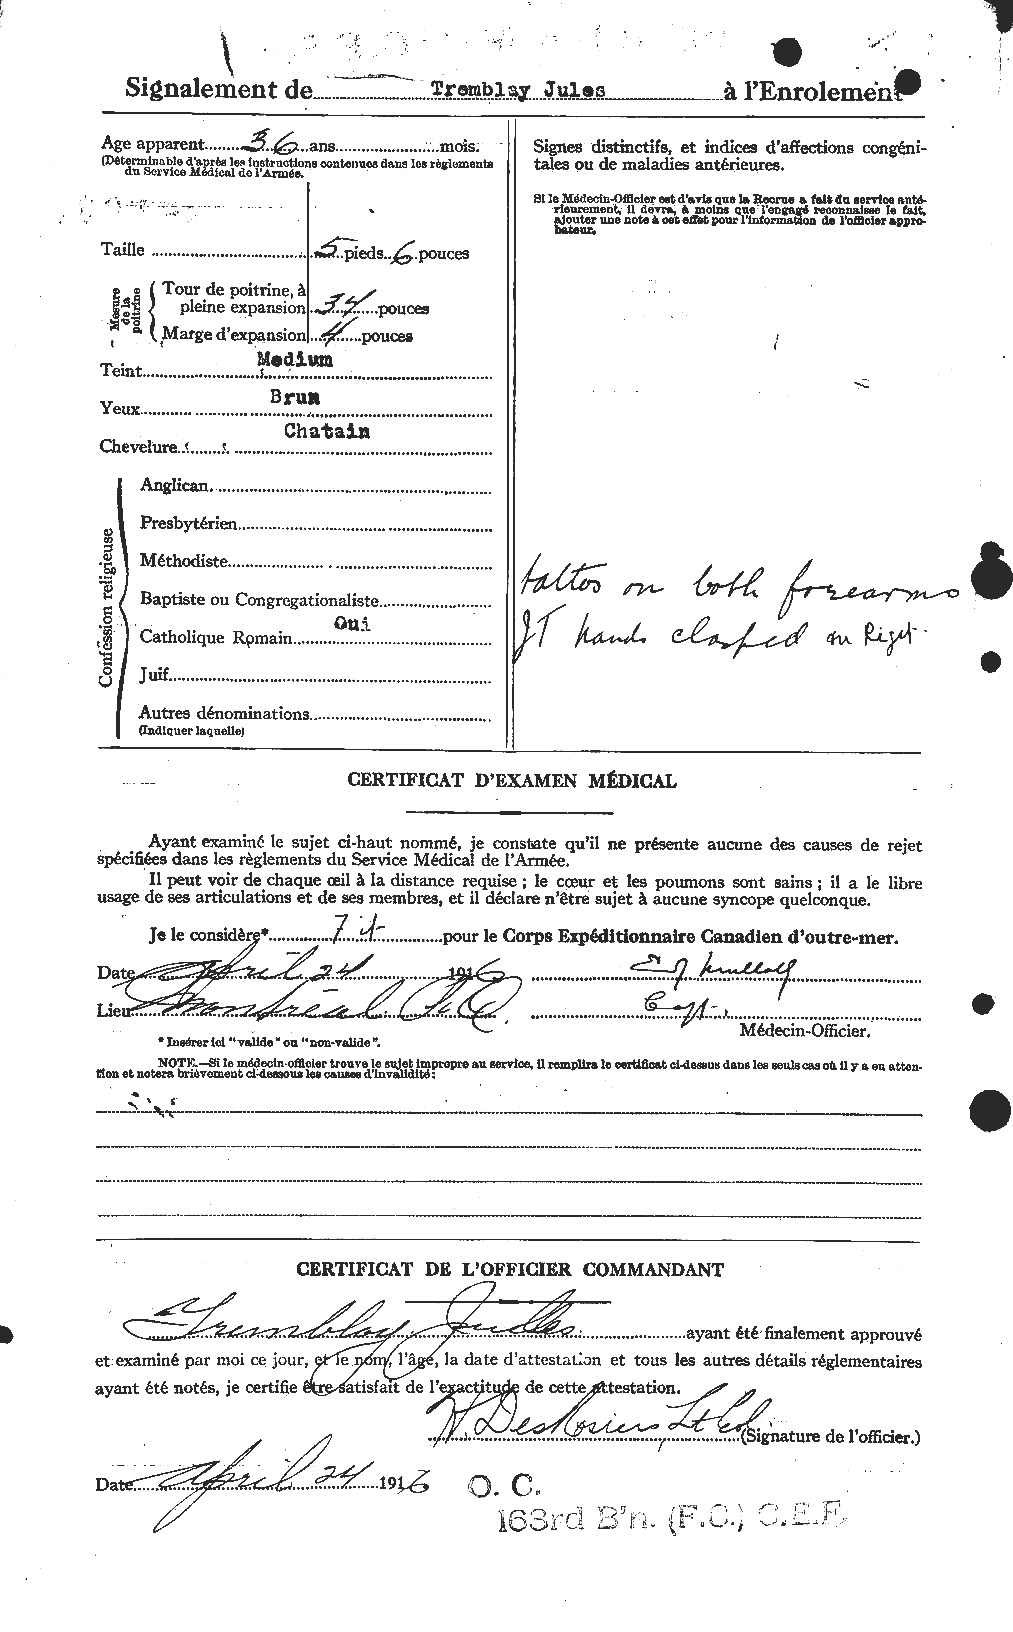 Personnel Records of the First World War - CEF 639172b